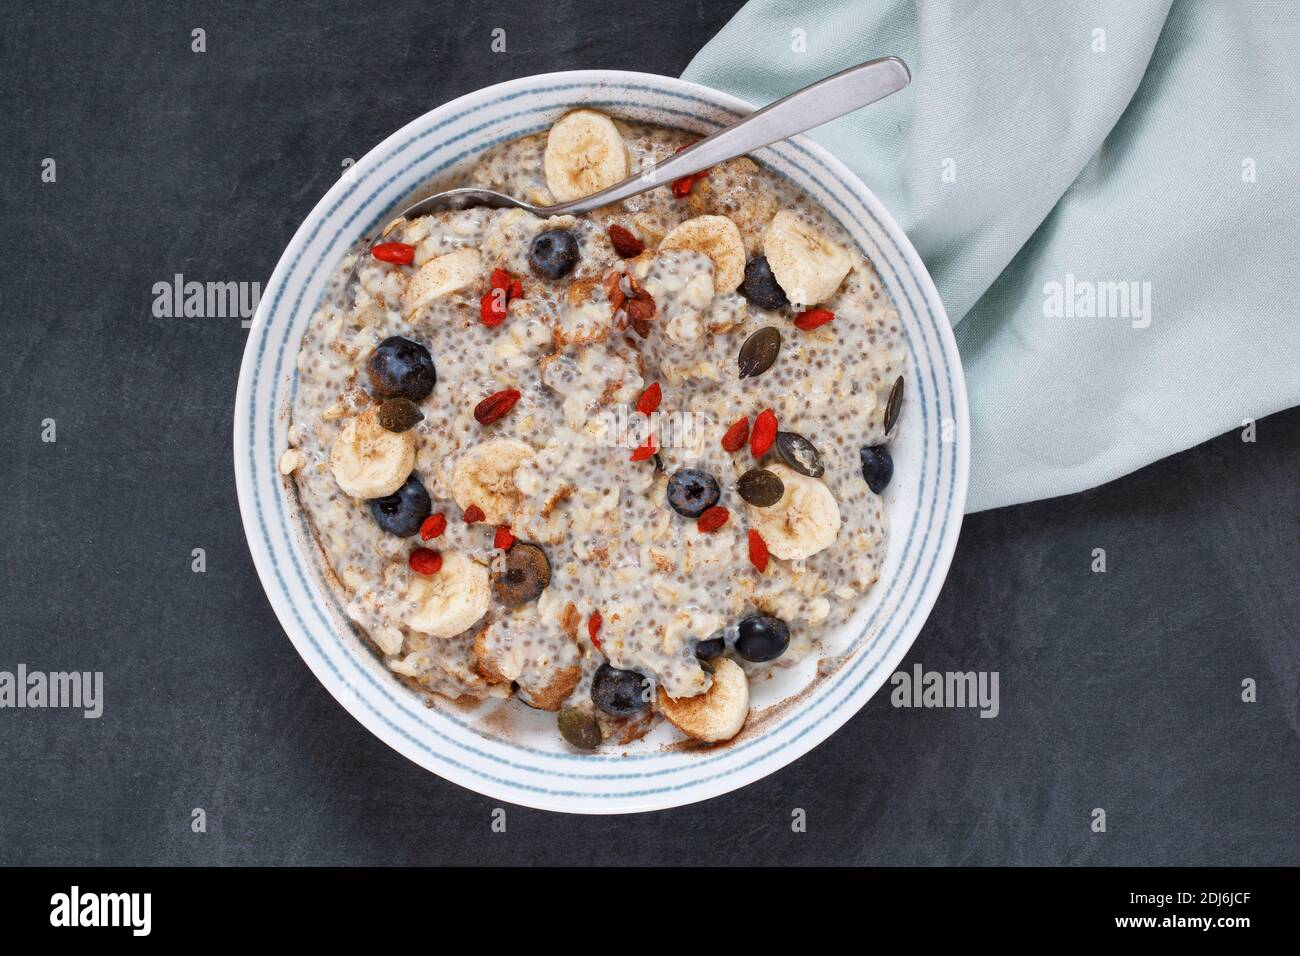 A healthy breakfast. Oat and Chia porridge with fruits and seeds. Stock Photo